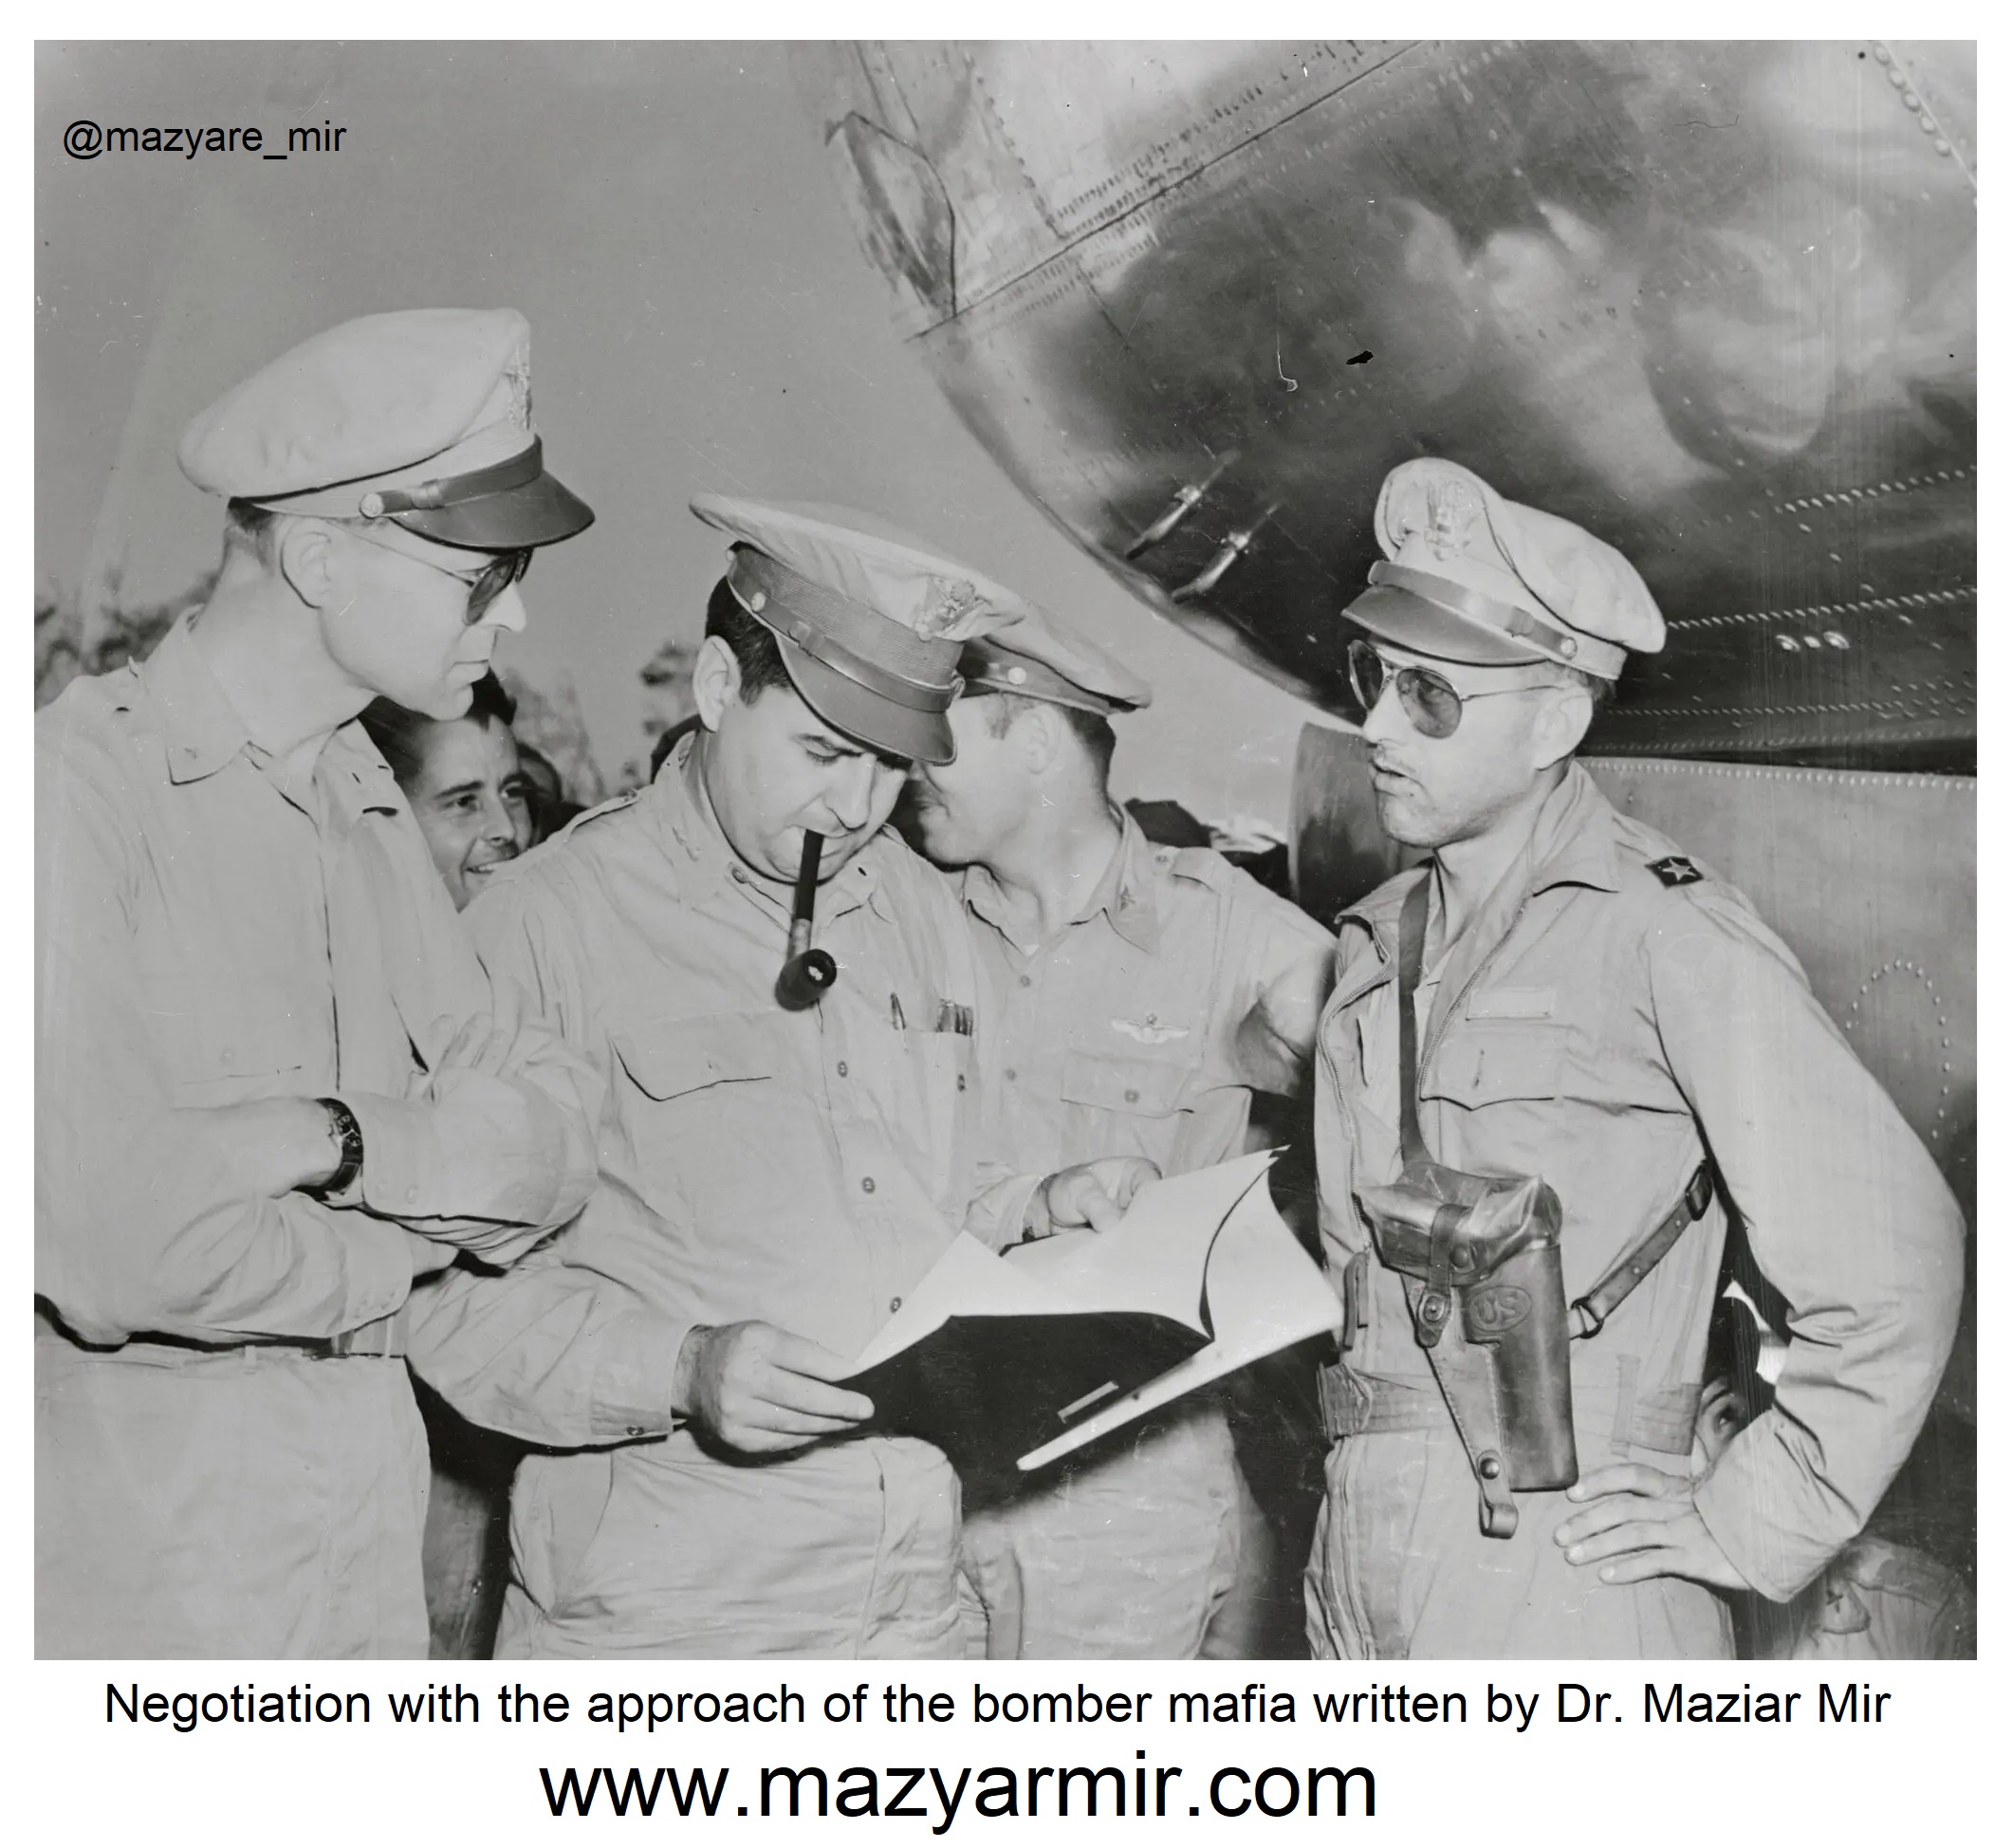 Negotiation with the approach of the bomber mafia written by Dr. Maziar Mir